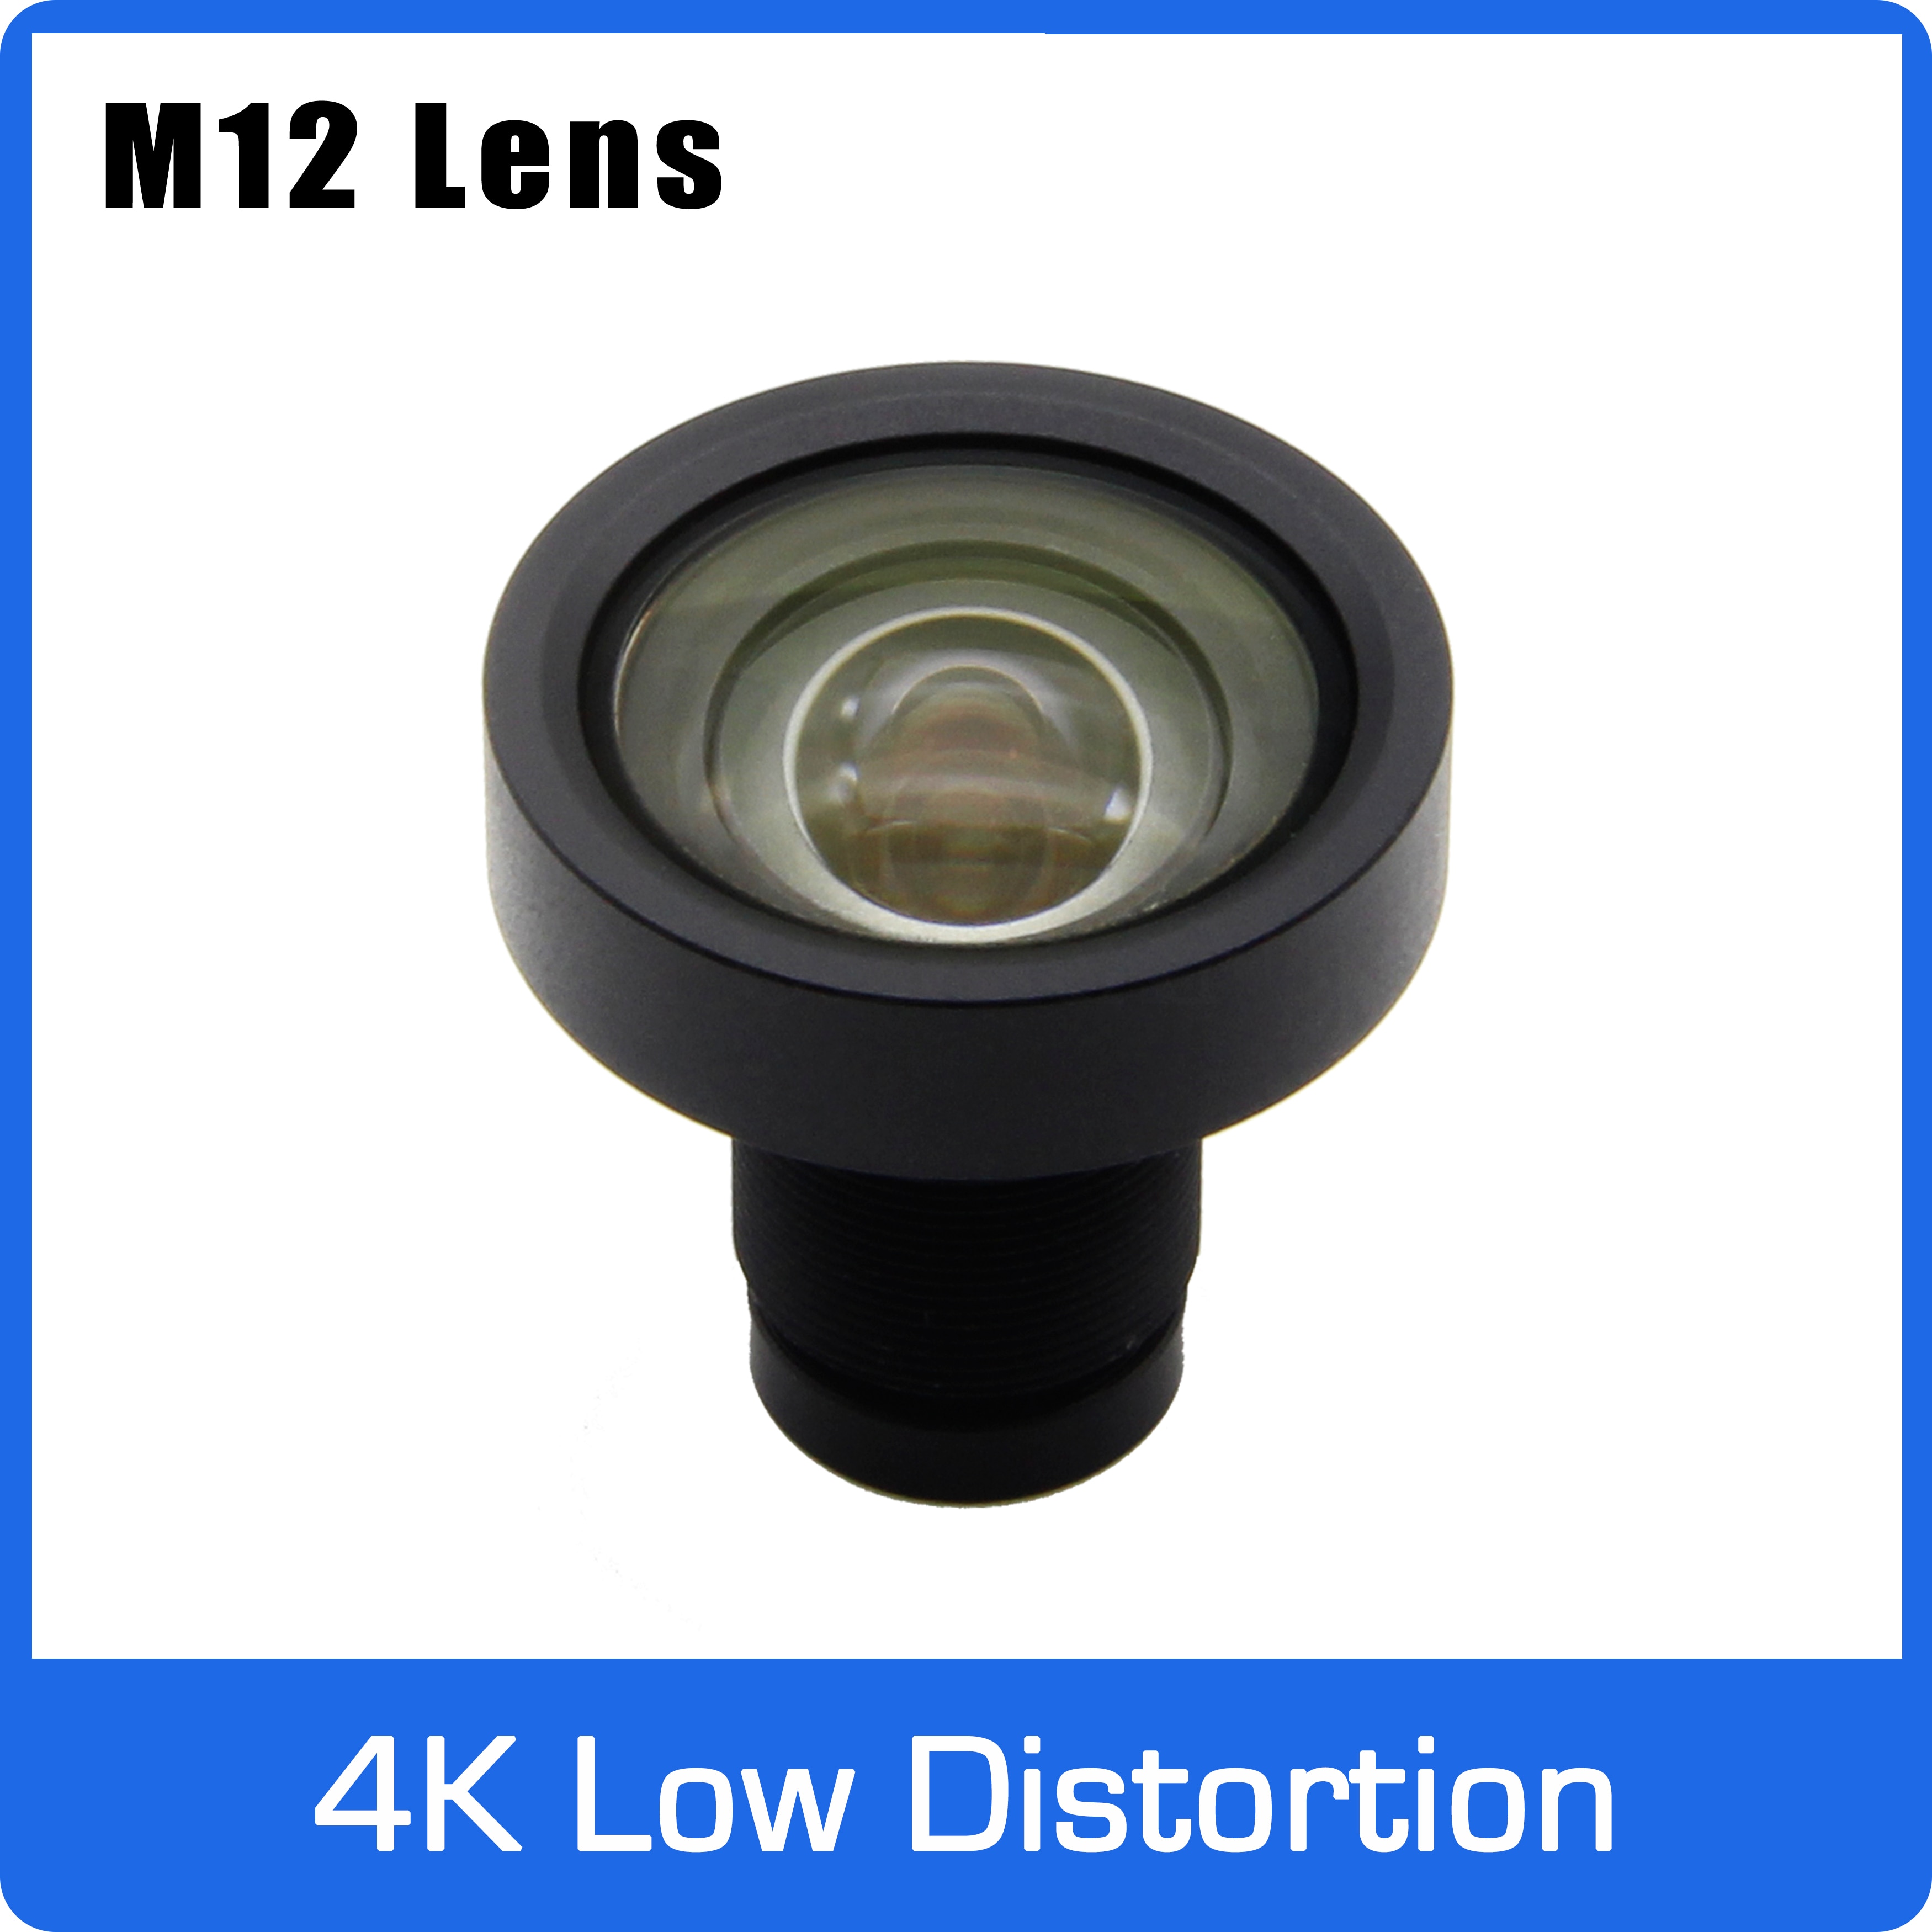 8Megapixel Fixed 1/1.8 Inch 4.5 Mm Lage Vervorming F2.0 Lens Voor Sony IMX178/226/334 Ov OS08A10 8MP Ip Cctv Camera